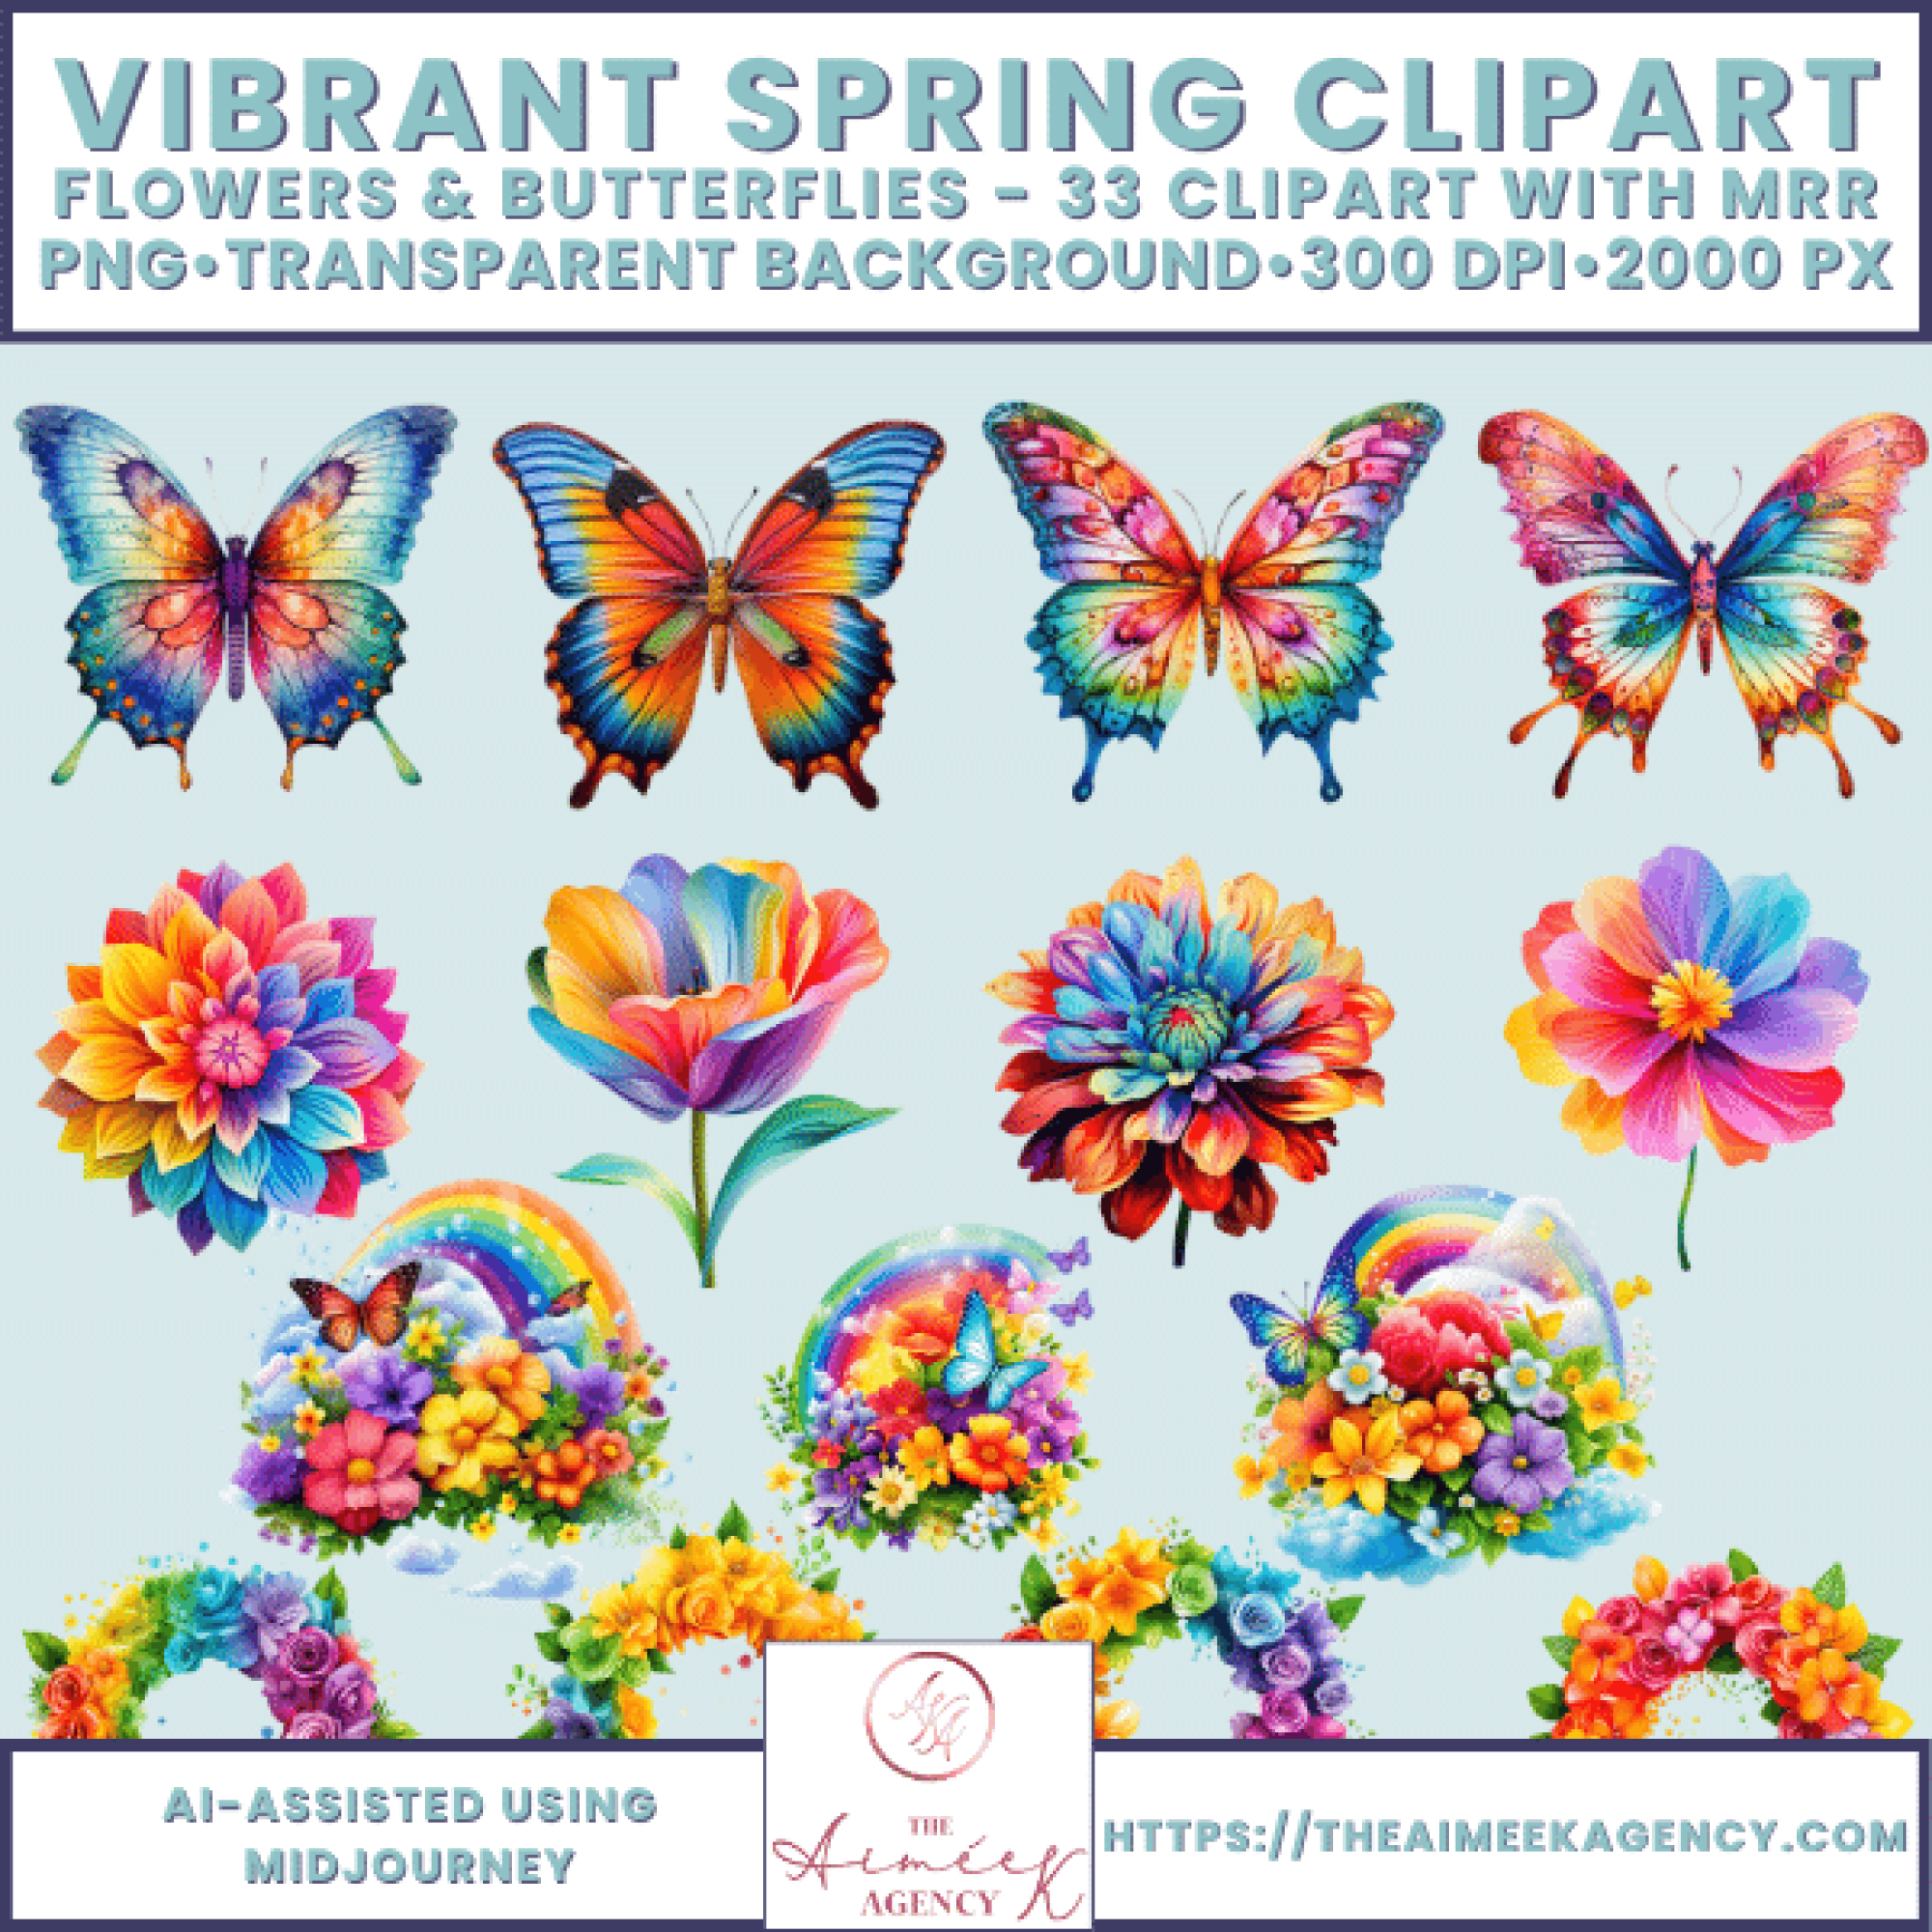 Vibrant spring clipart with butterflies and flowers.